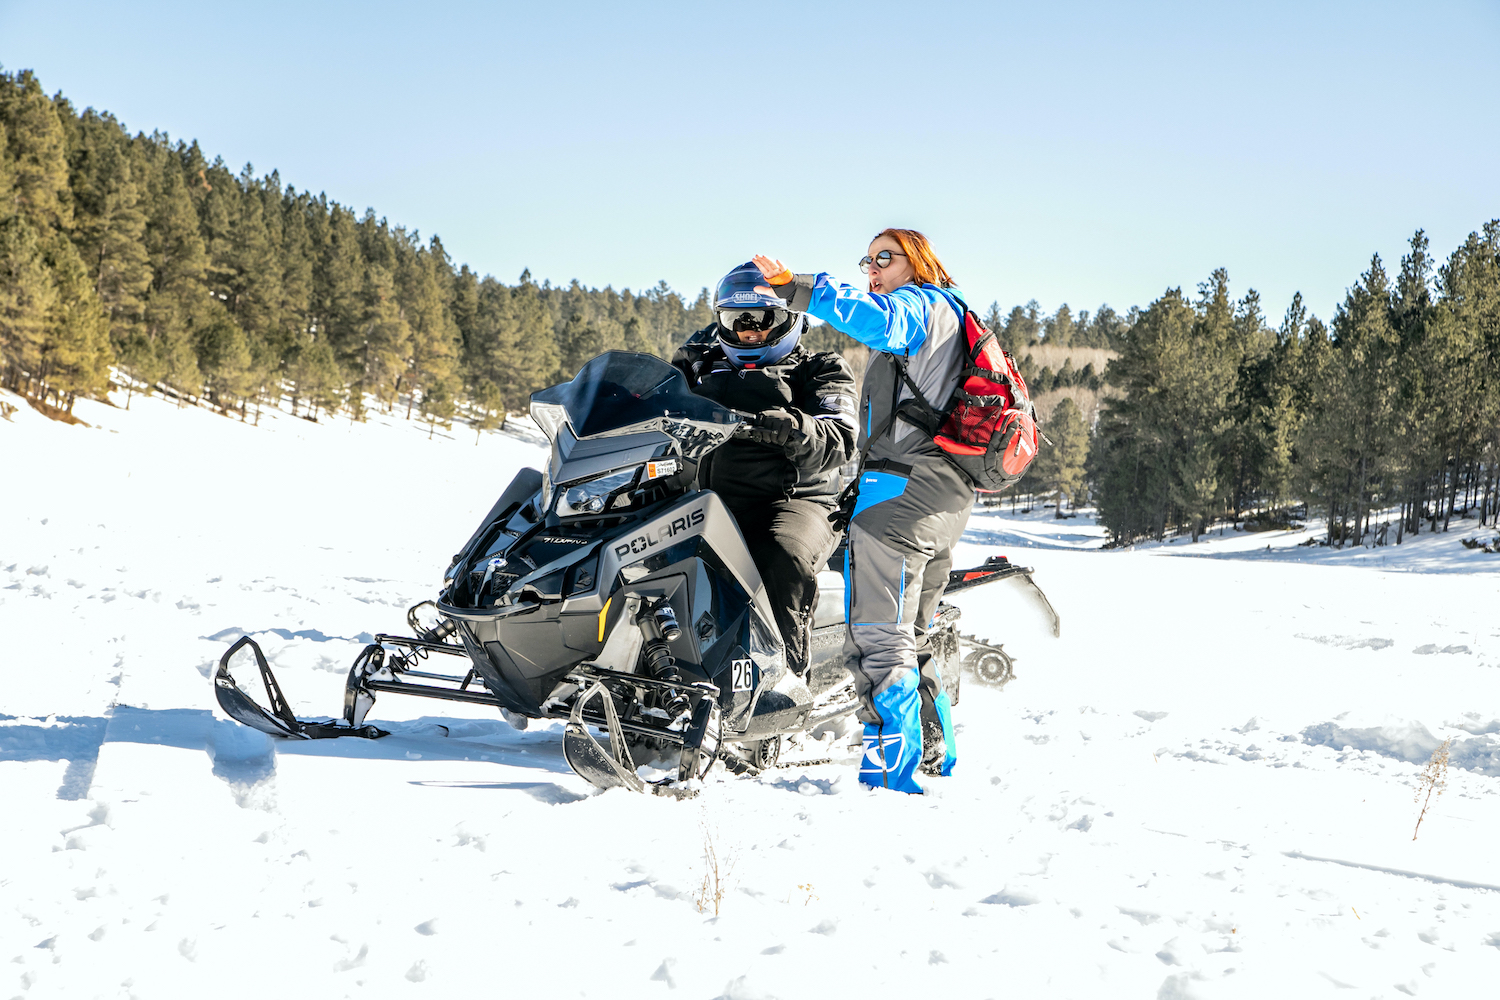 The Polaris team was very knowledgeable and gave us many riding tips along the way. Here Polaris’ Mallory Apperson gives some pointers to Porsche Taylor, who picked it up like a pro!